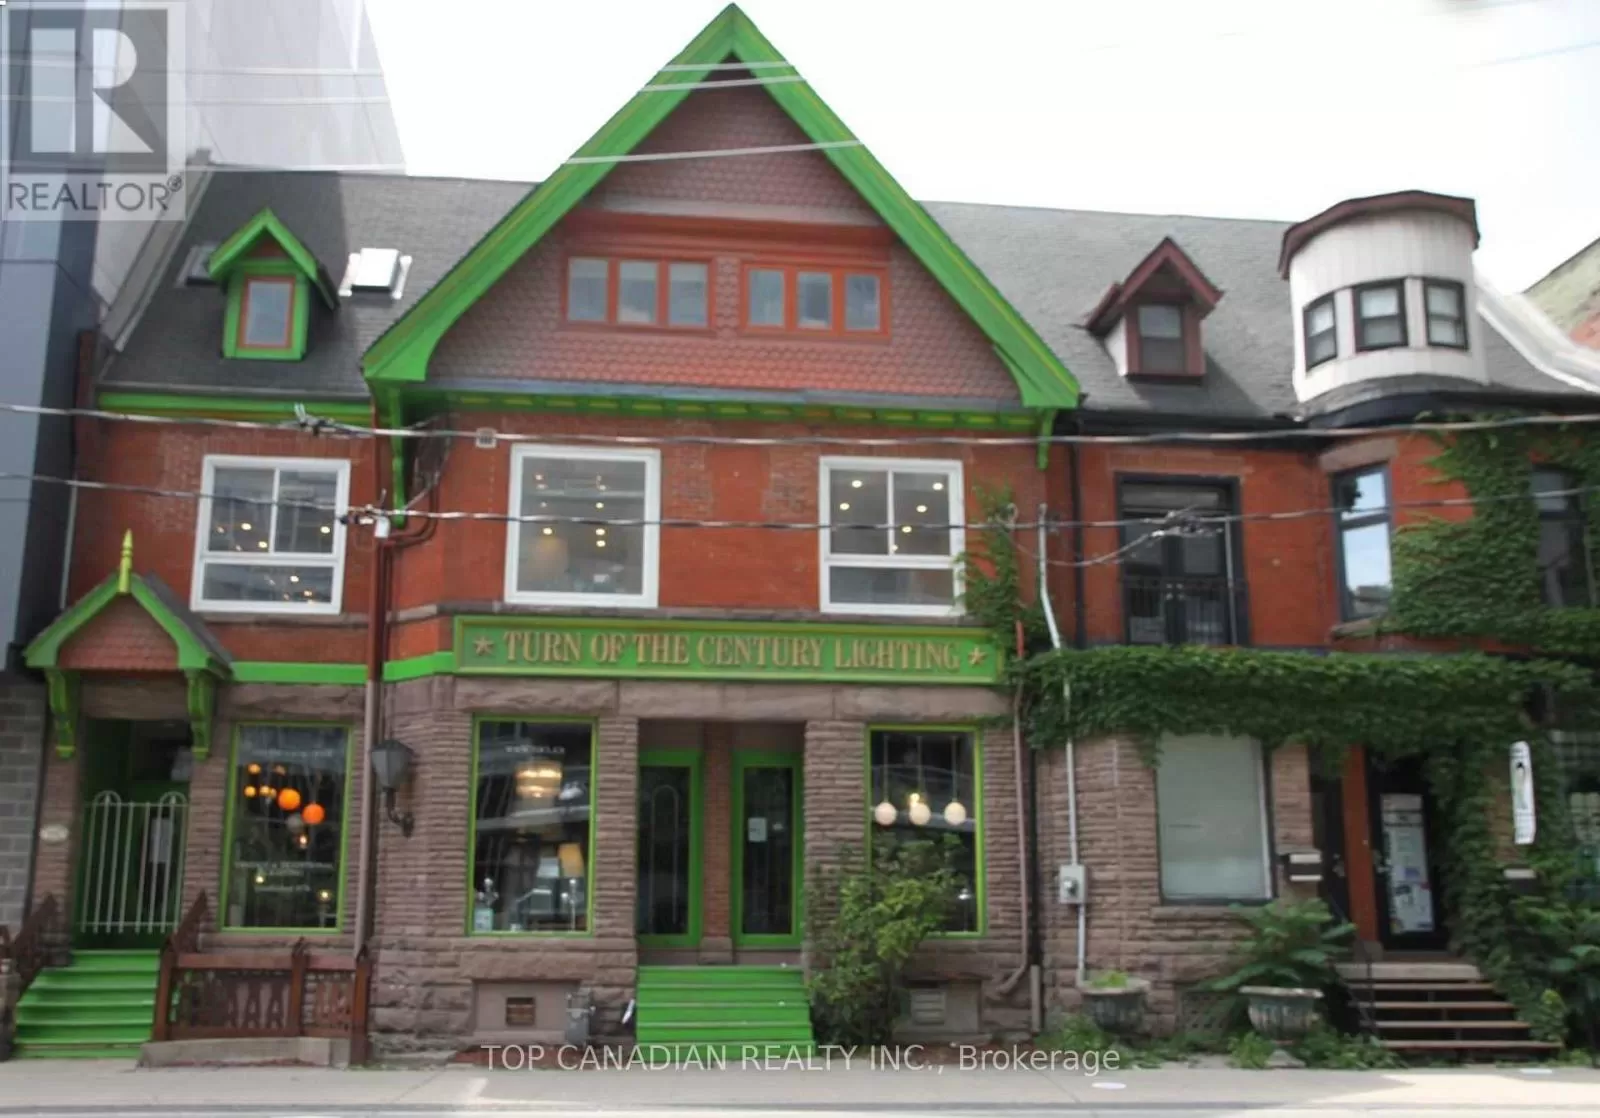 Offices for rent: 3rd Fl - 114 Sherbourne Street, Toronto, Ontario M5A 2R2